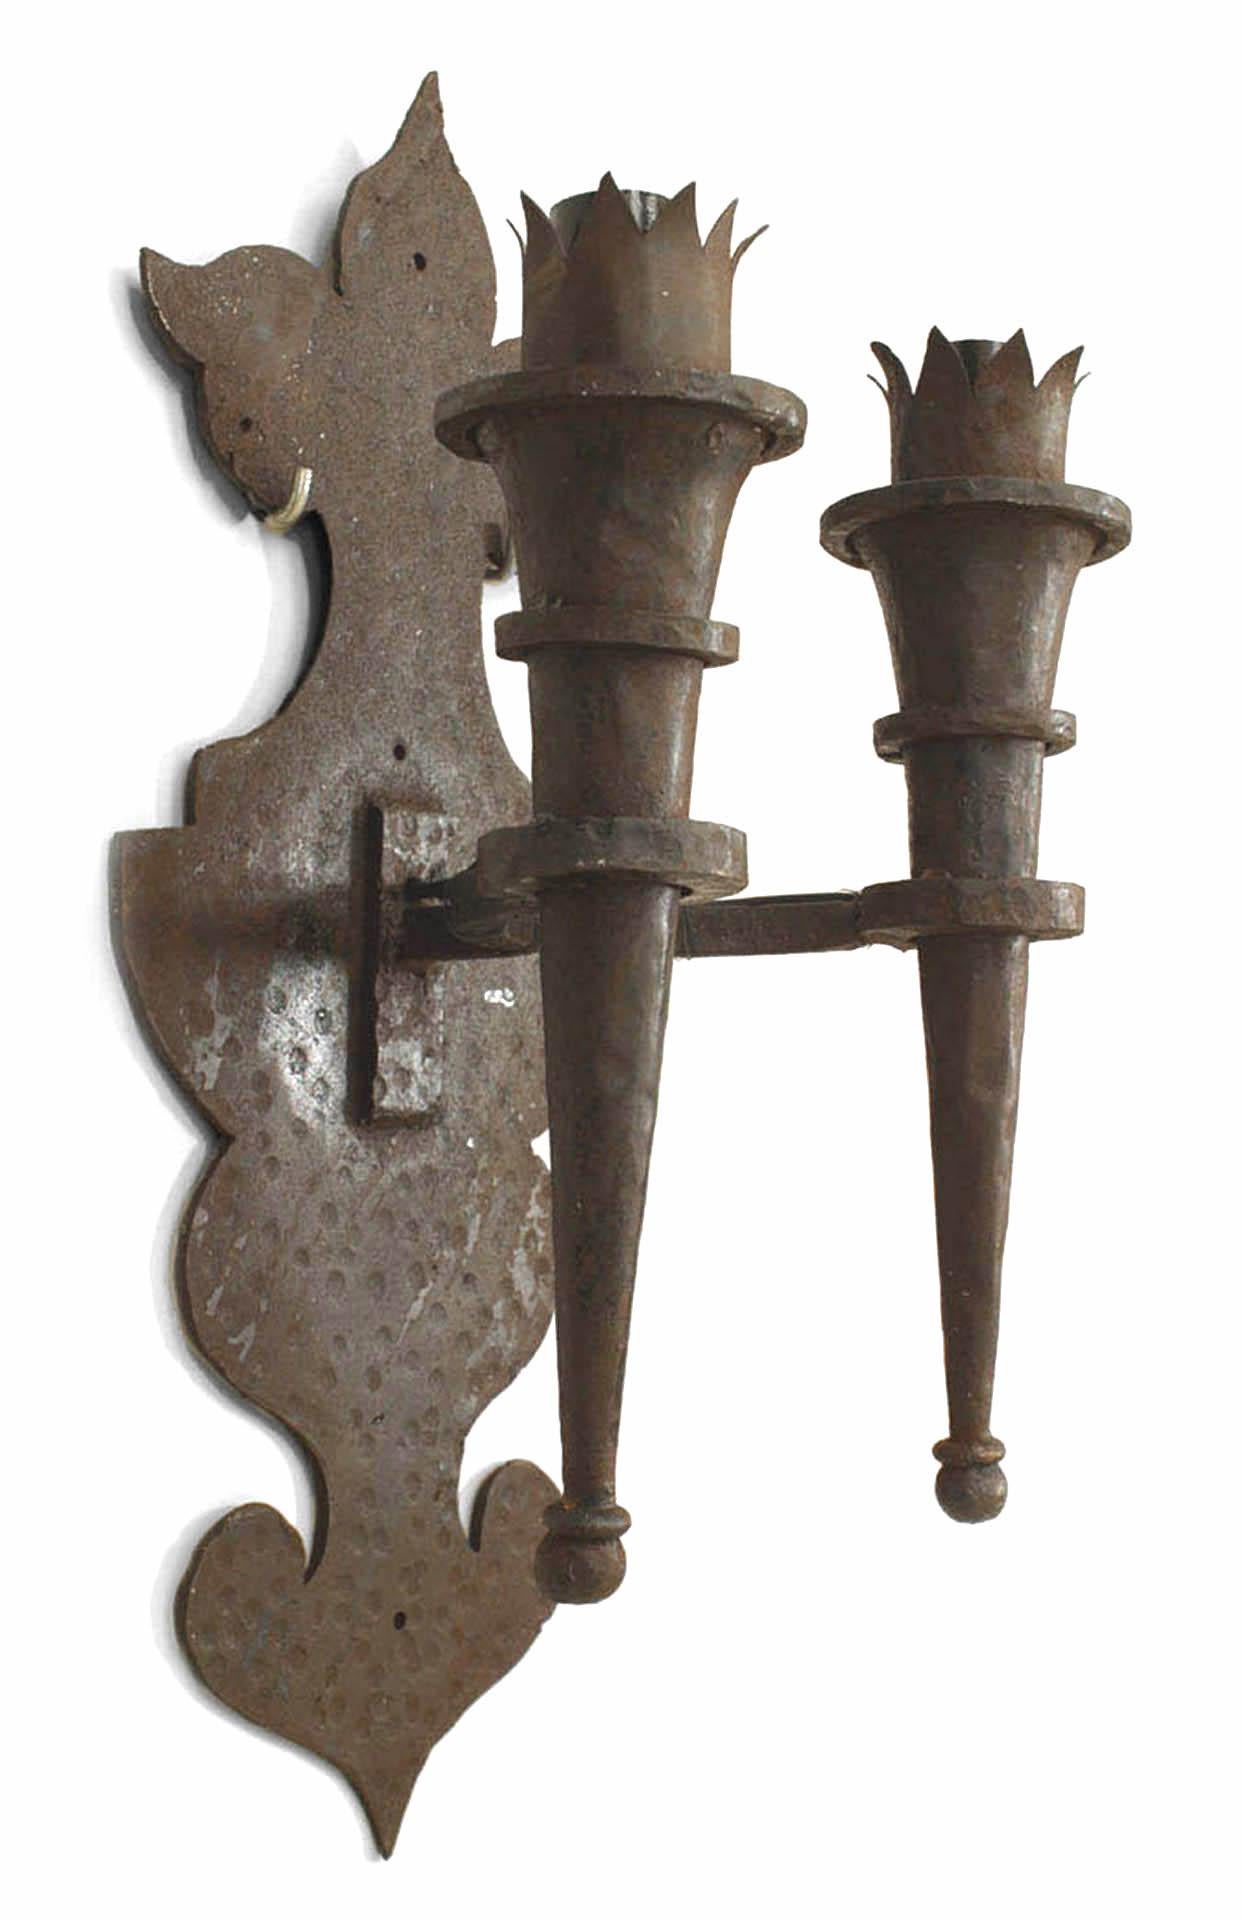 Pair of American Renaissance Revival-style (20th Century) wrought iron wall sconces with two torch design arms and shaped backplate. (PRICED AS Pair)
